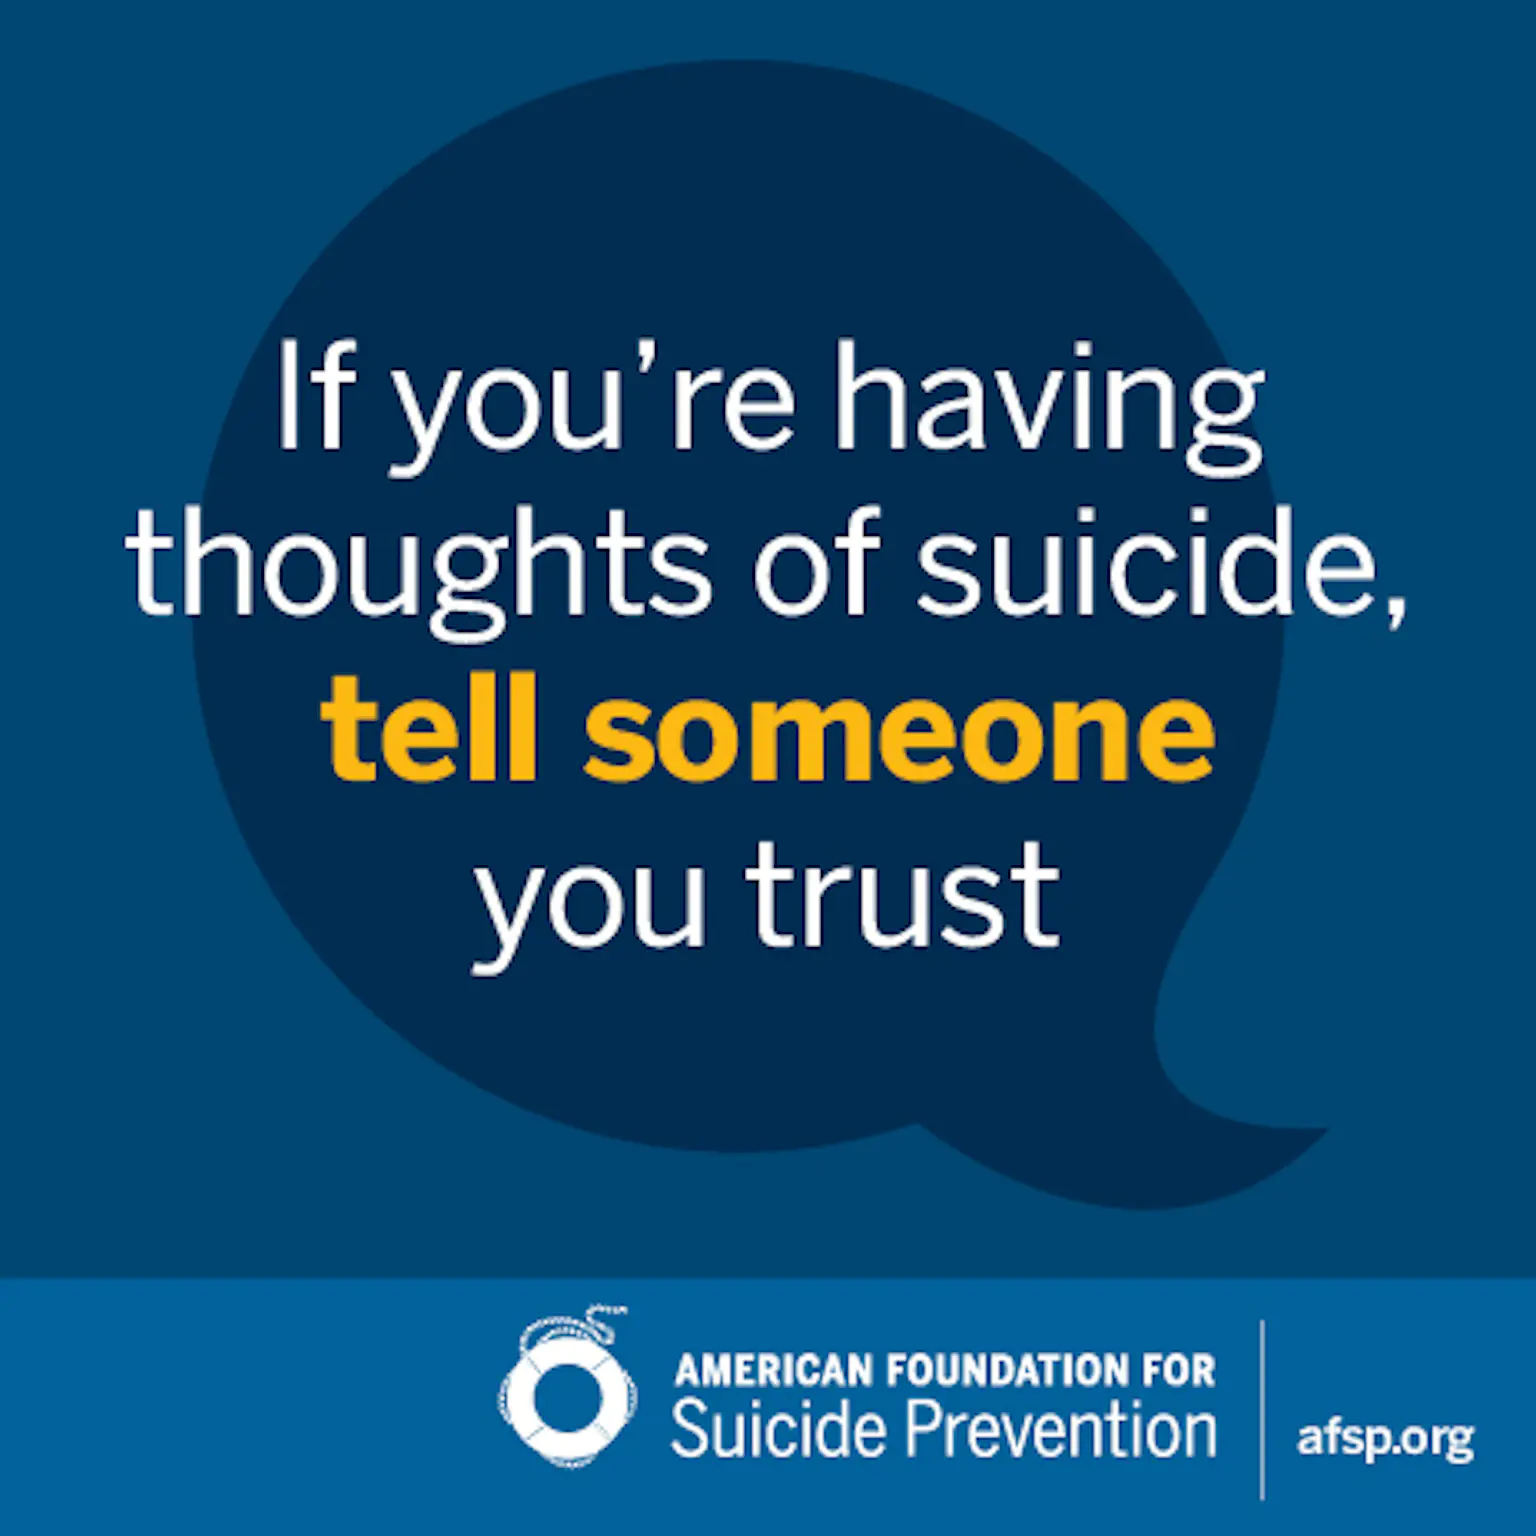 If you're having thoughts of suicide, tell someone you trust